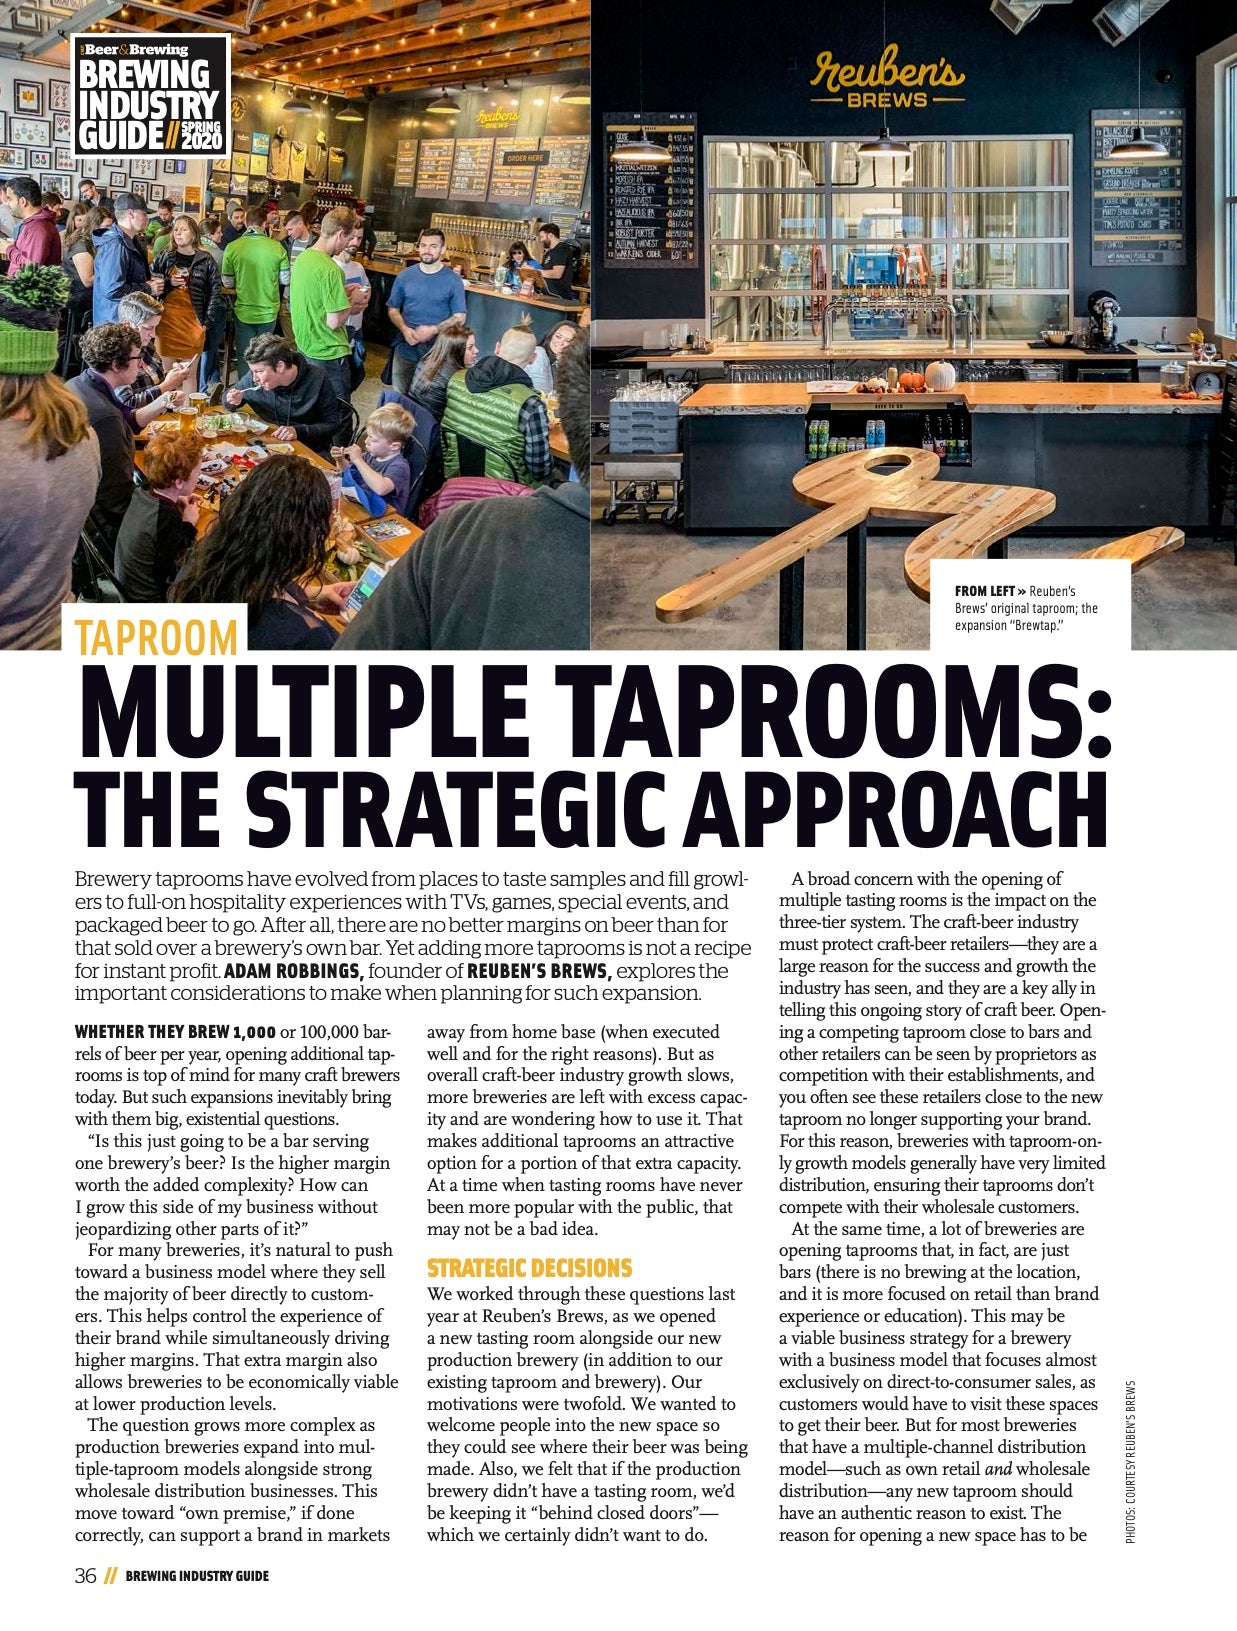 Brewing Industry Guide Spring 2020 (Brewhouse Equipment) - Craft Beer & Brewing